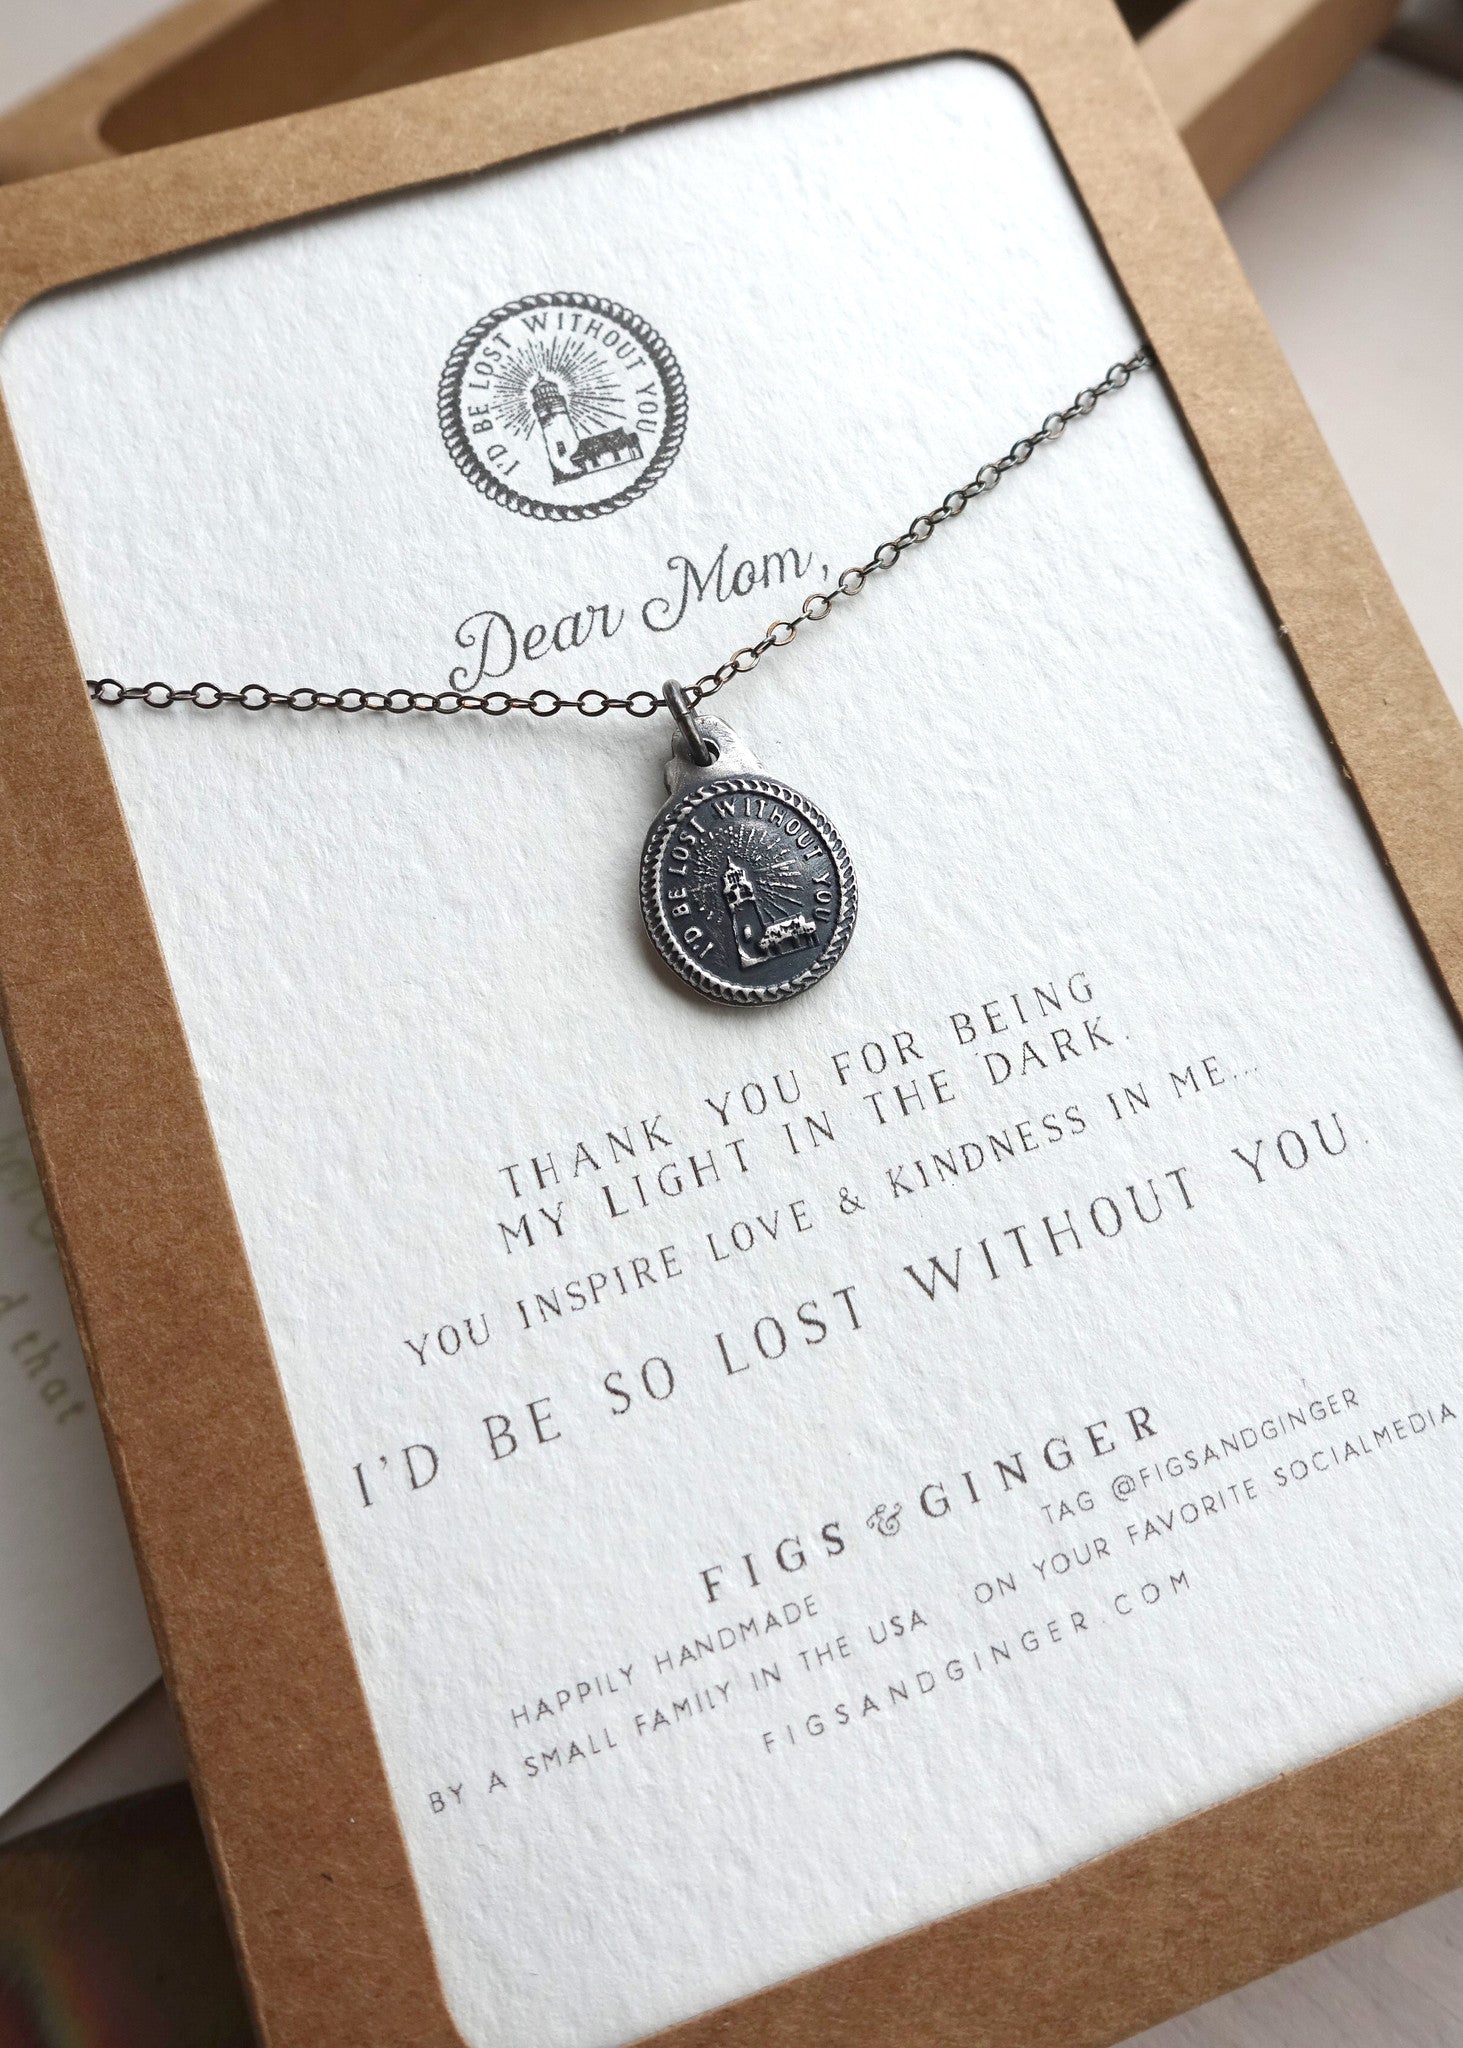 Dear Mom: I'd Be Lost Without You Necklace